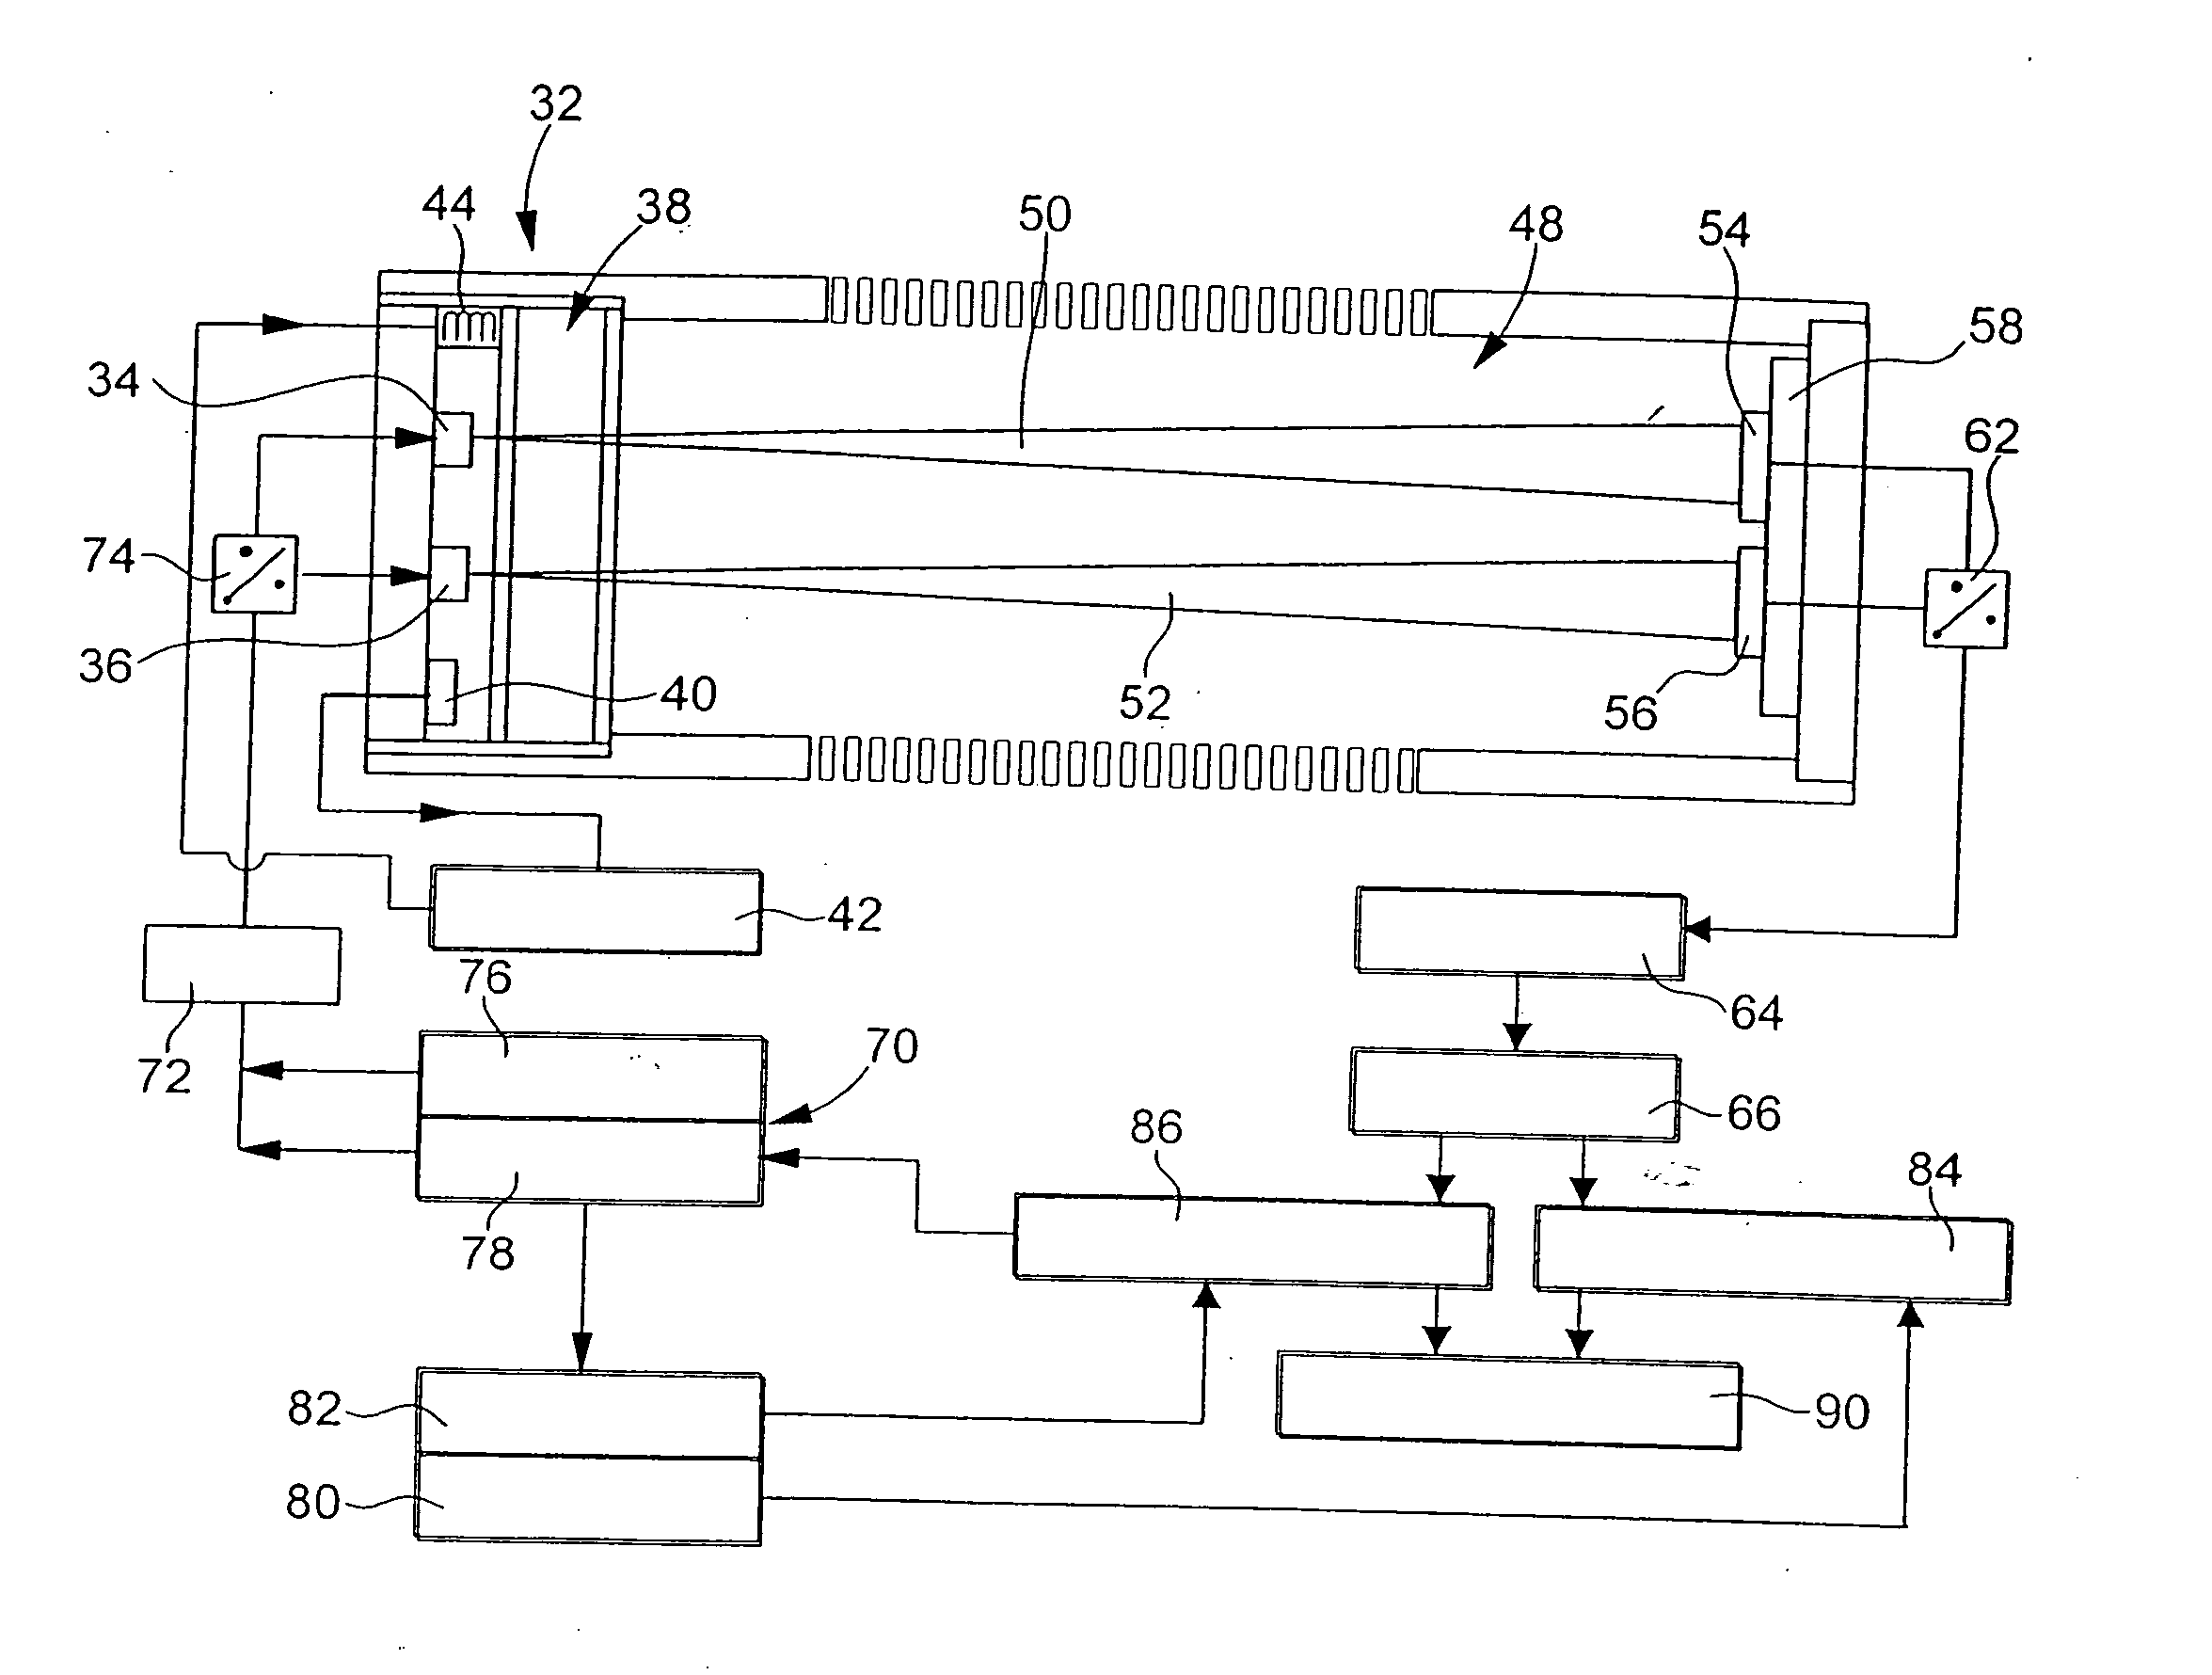 Gas detection method and gas detector device